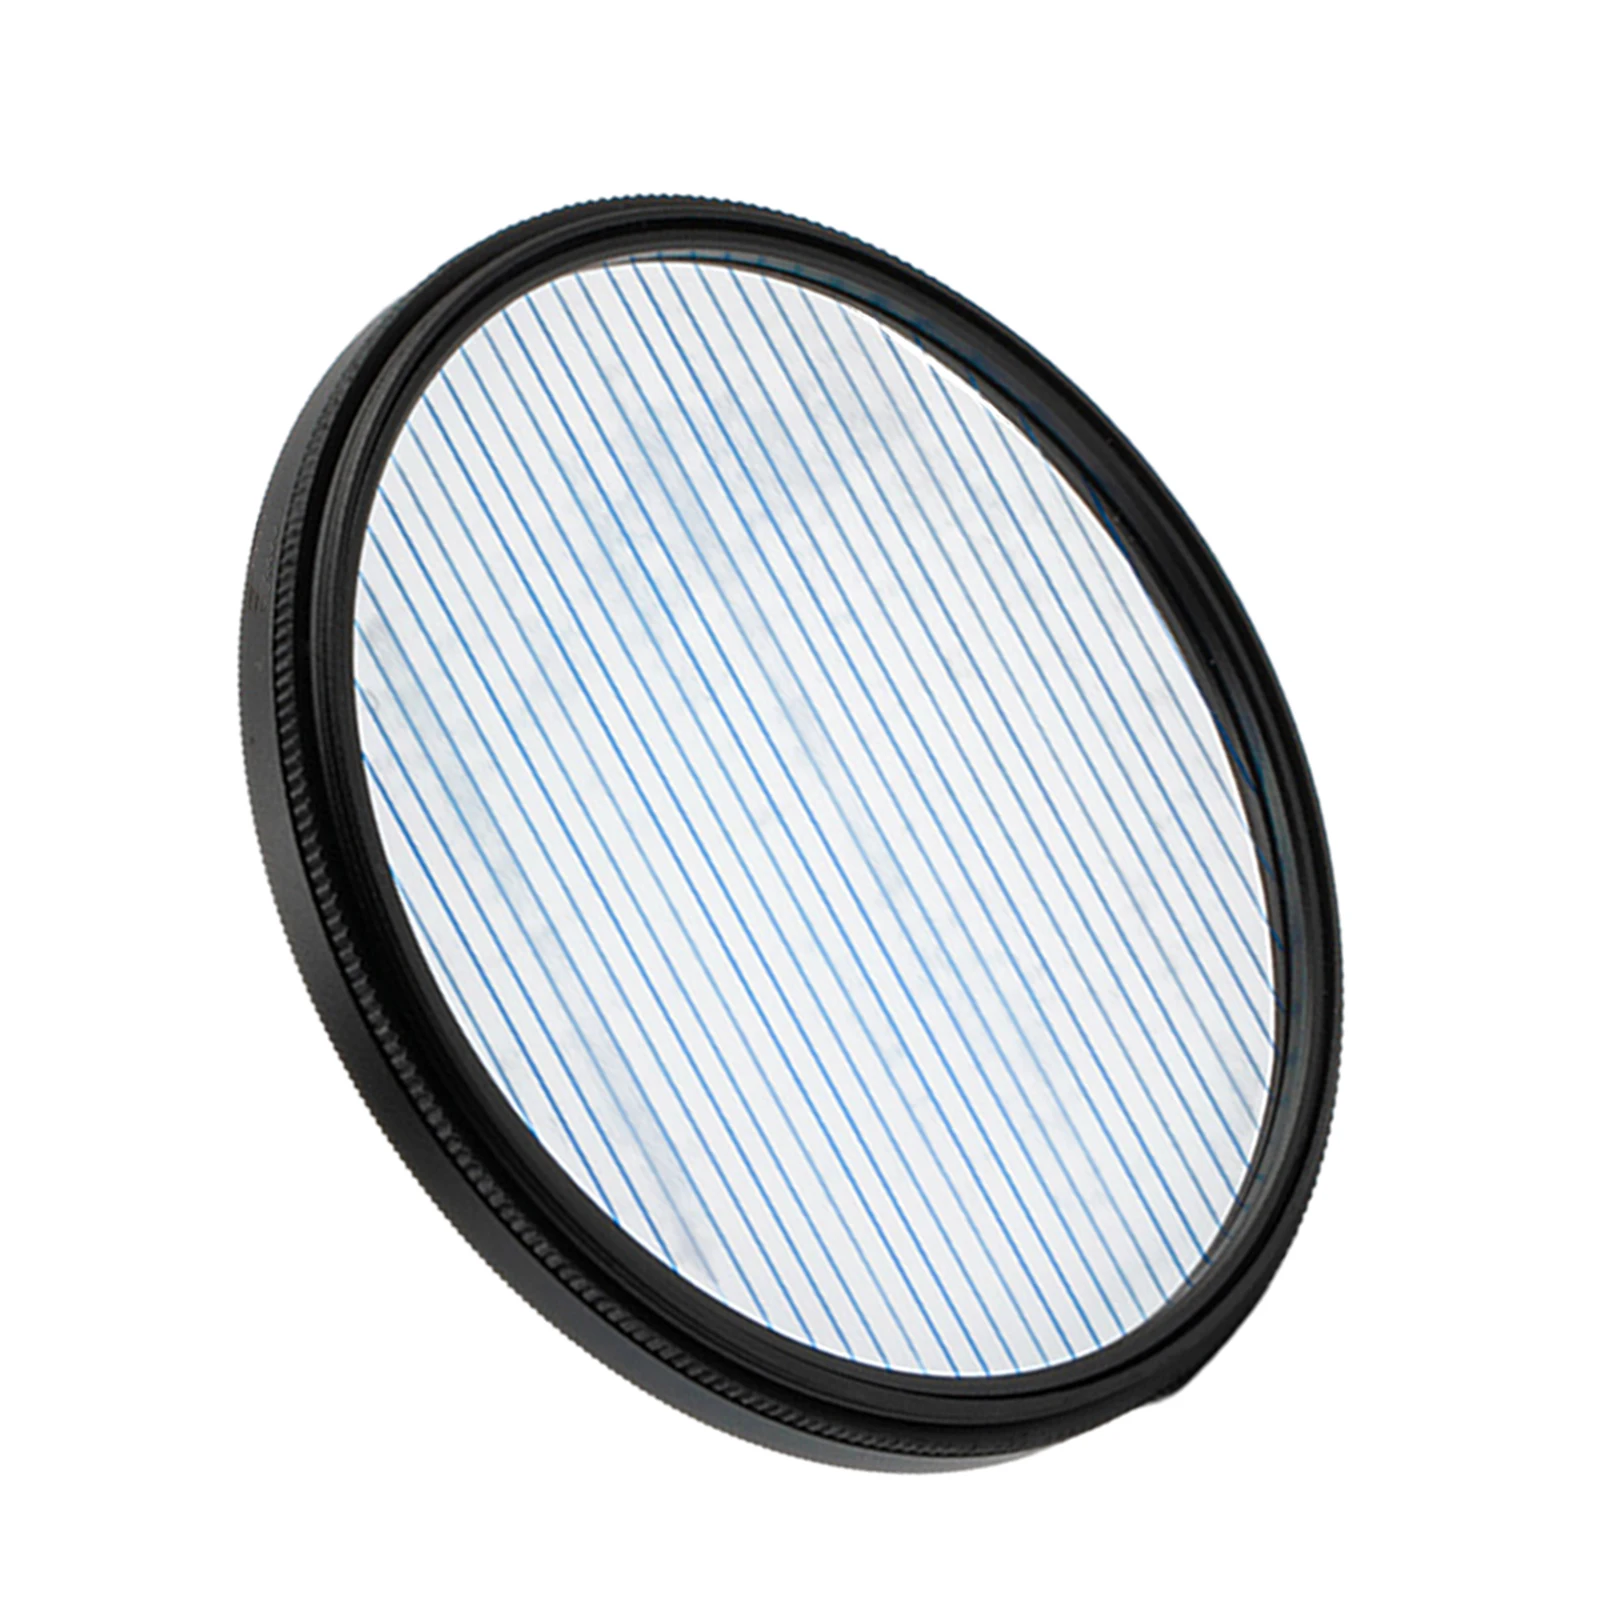 High Quality Streak Filter Anamorphic Optical Glass with Rotating Ring for DSLR Cinematice Video Camera Accessories Blue Rainbow